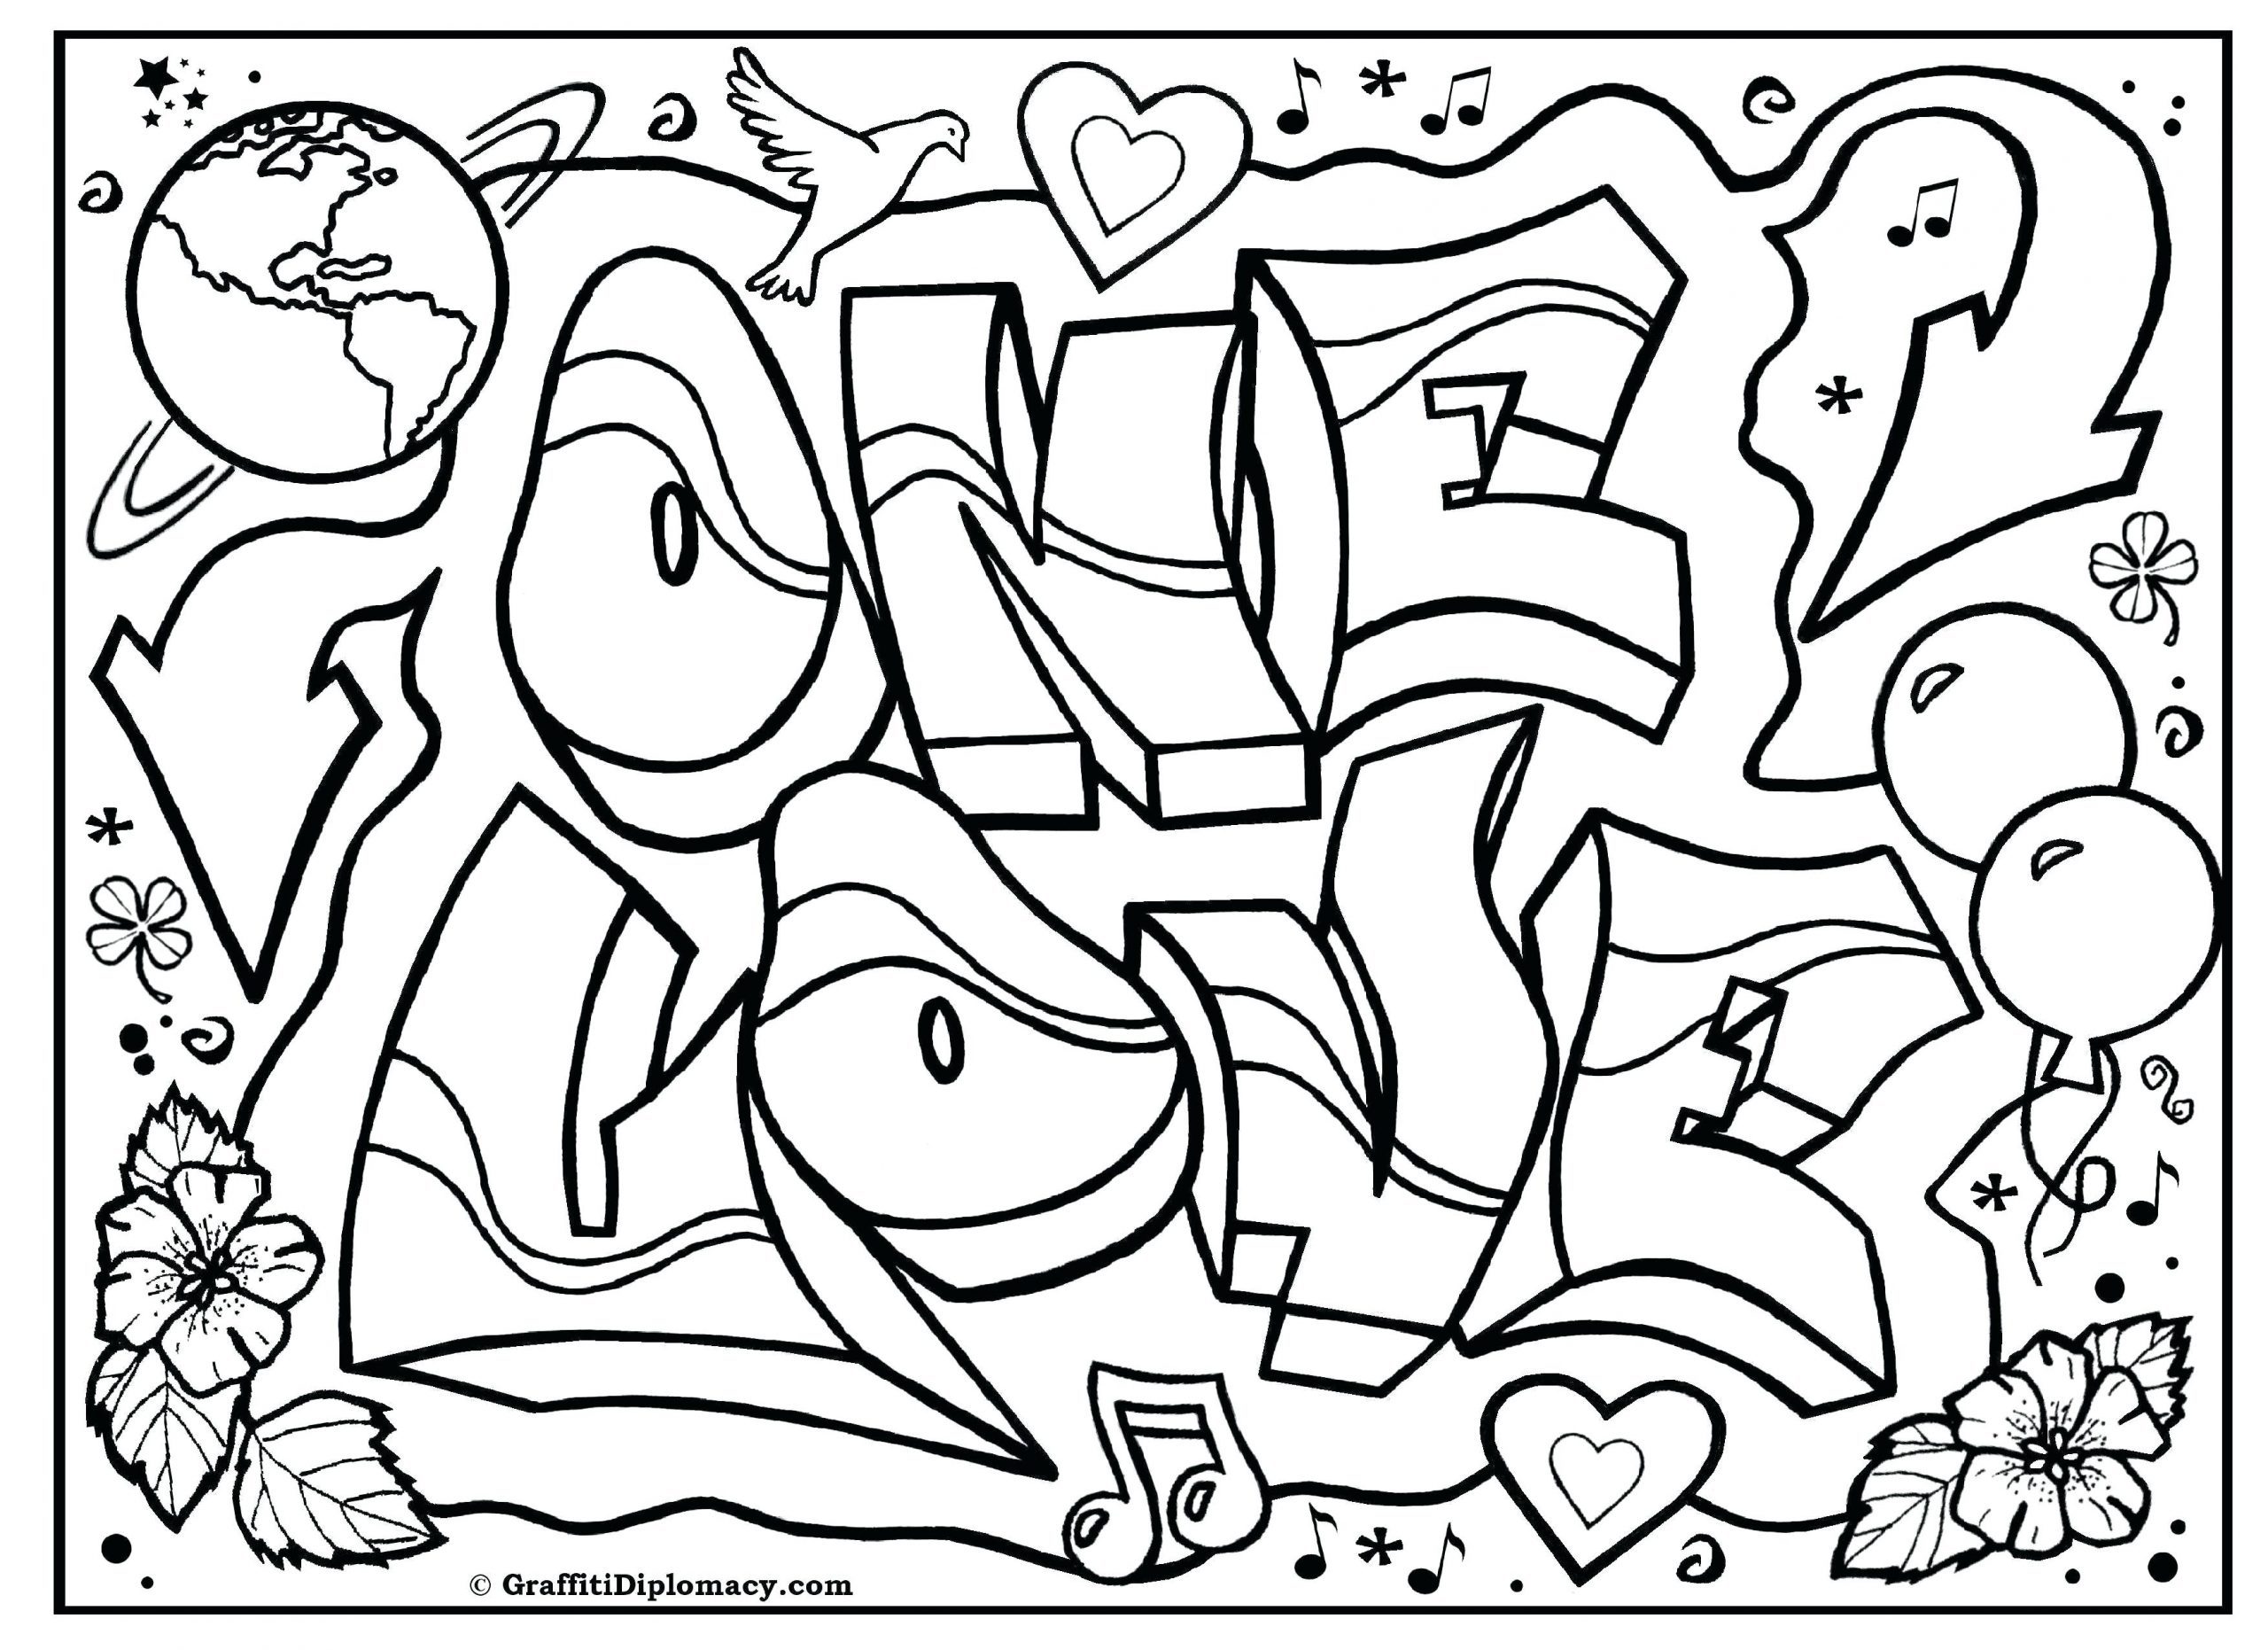 Coloring Pages : Trippy Colorges Coloring Coloringk Easy To Make Draw